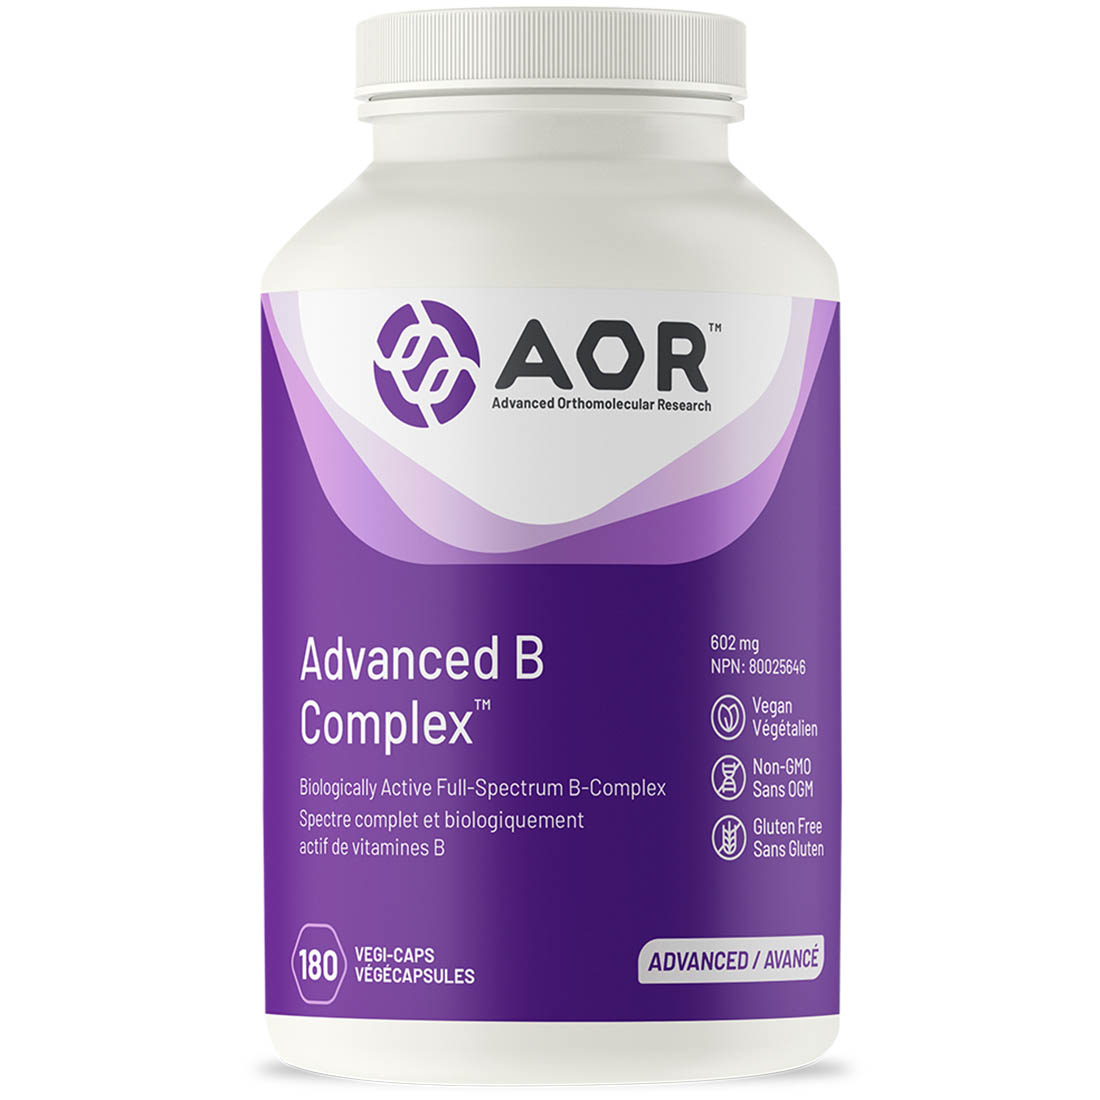 AOR Advanced B Complex, 499mg, Biologically Active Full Spectrum